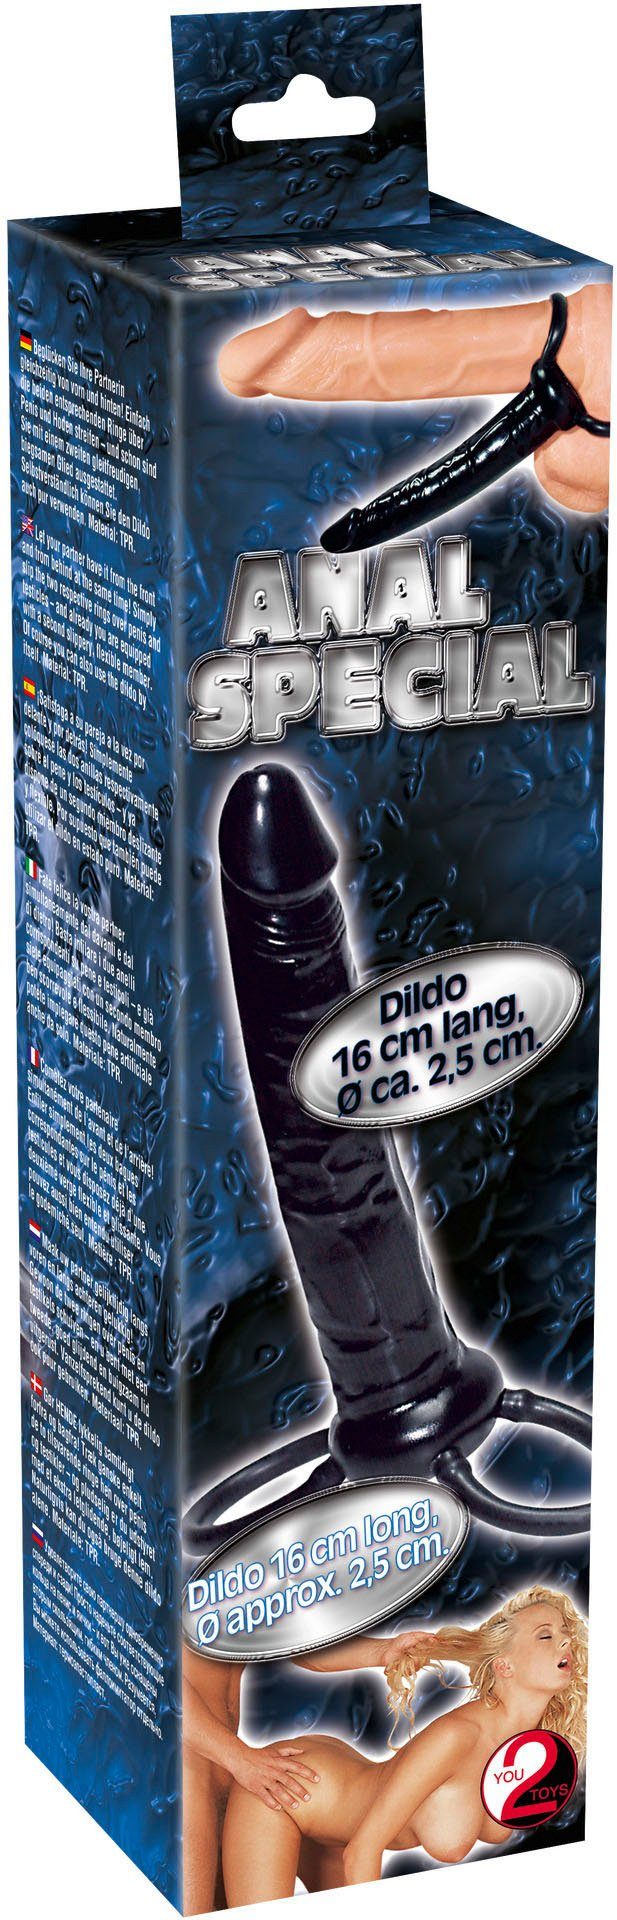 You2Toys Anal-Stimulator Analspecial